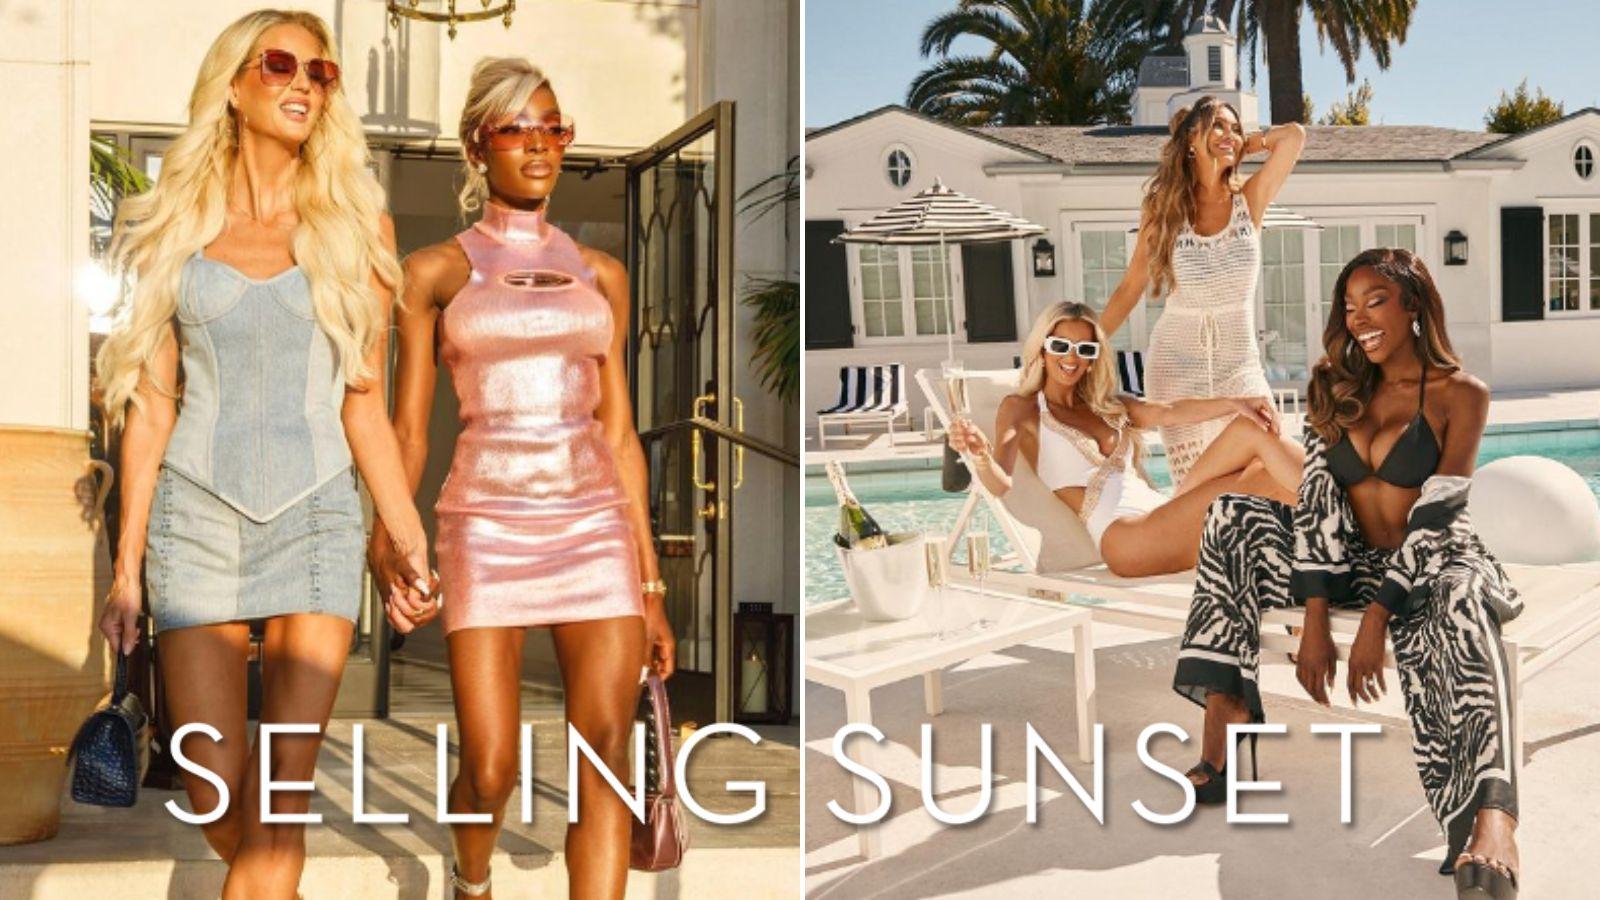 How to Dress Like the Cast of 'Selling Sunset